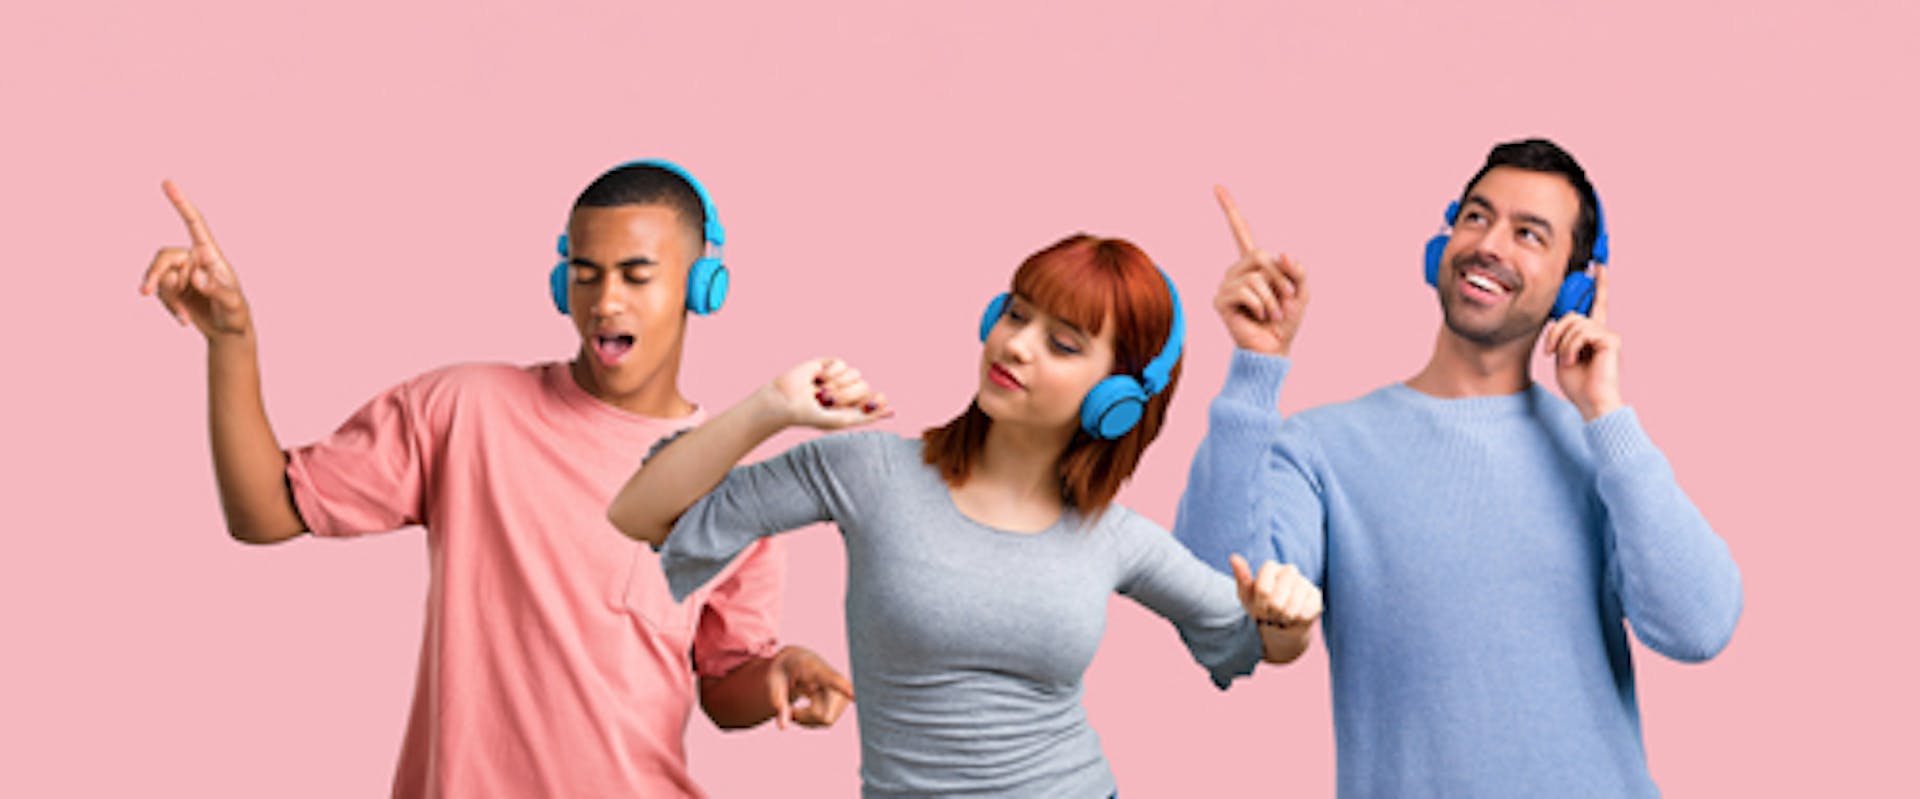 Young people listening to music with headphones